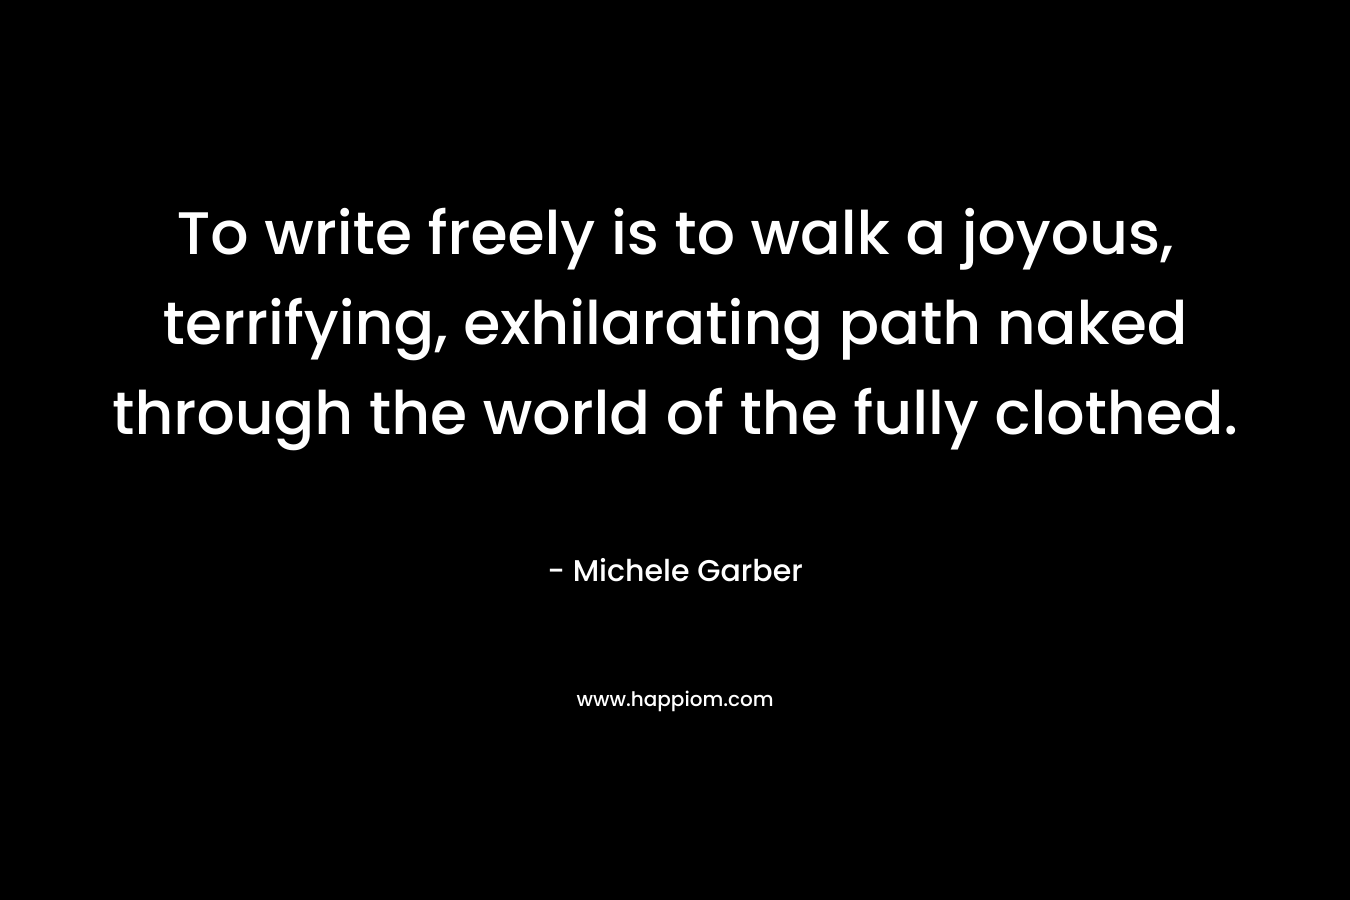 To write freely is to walk a joyous, terrifying, exhilarating path naked through the world of the fully clothed. – Michele Garber